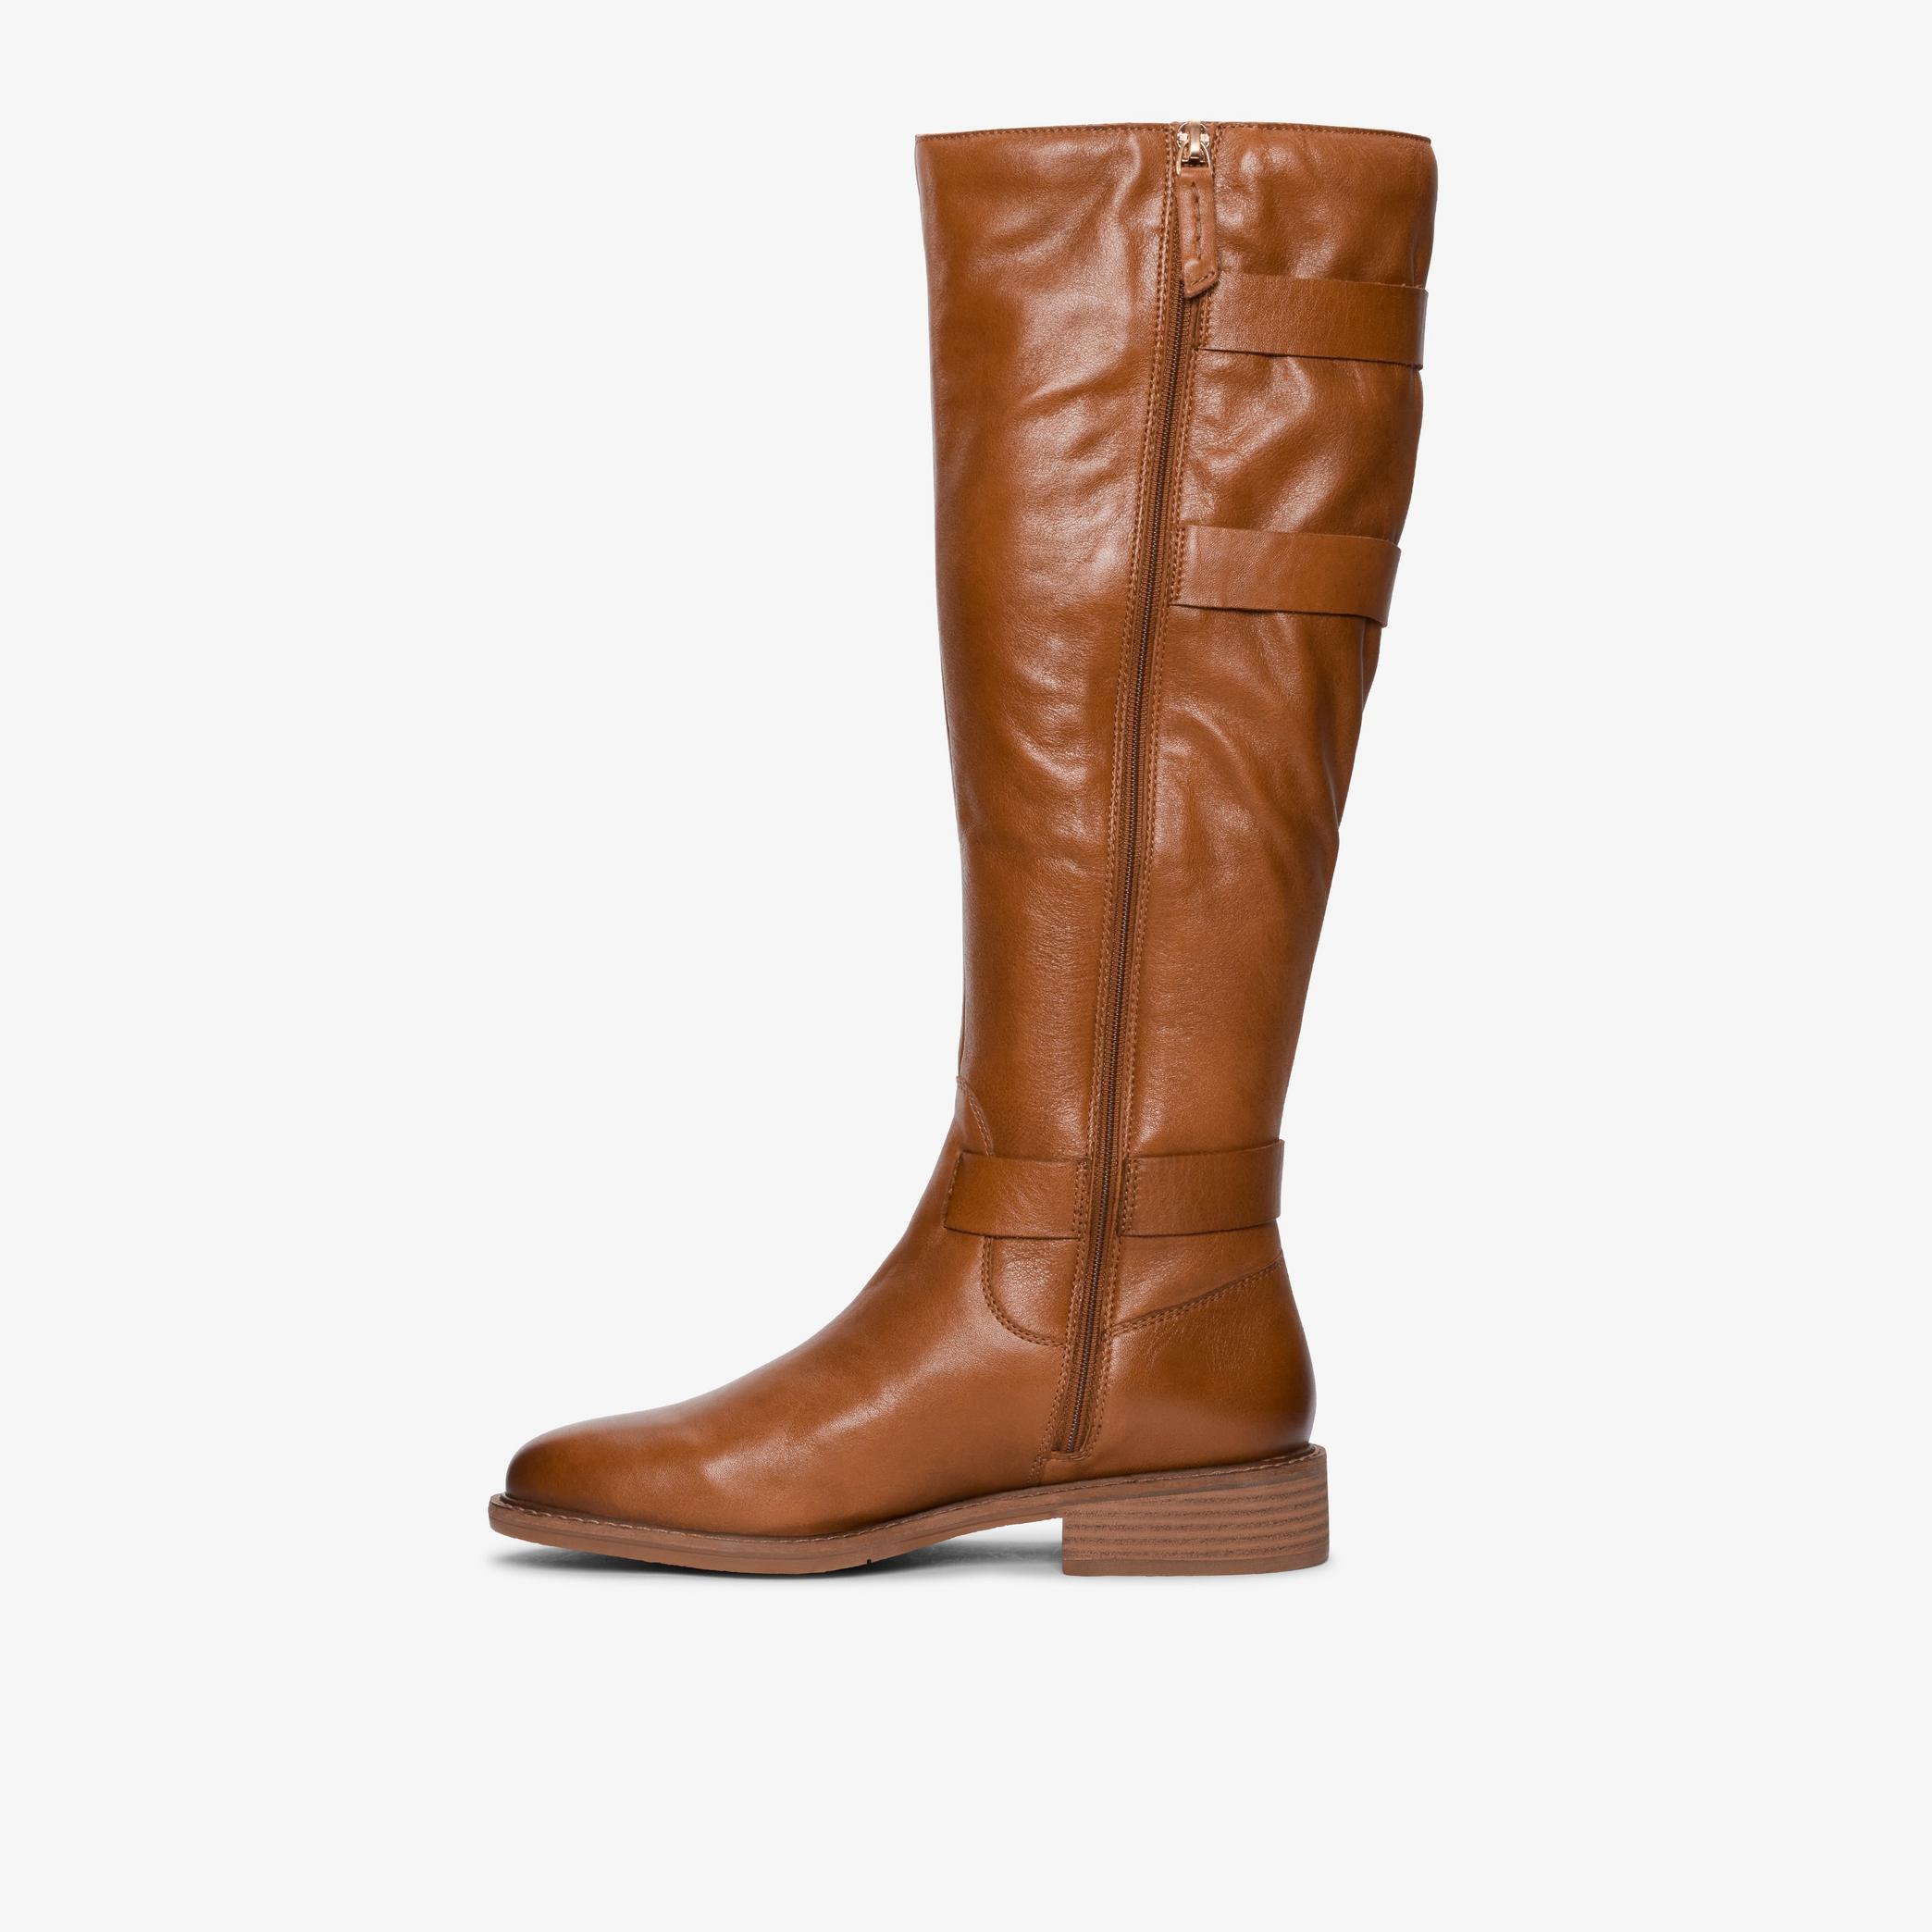 WOMENS Cologne Up British Tan Leather Knee High Boots | Clarks US